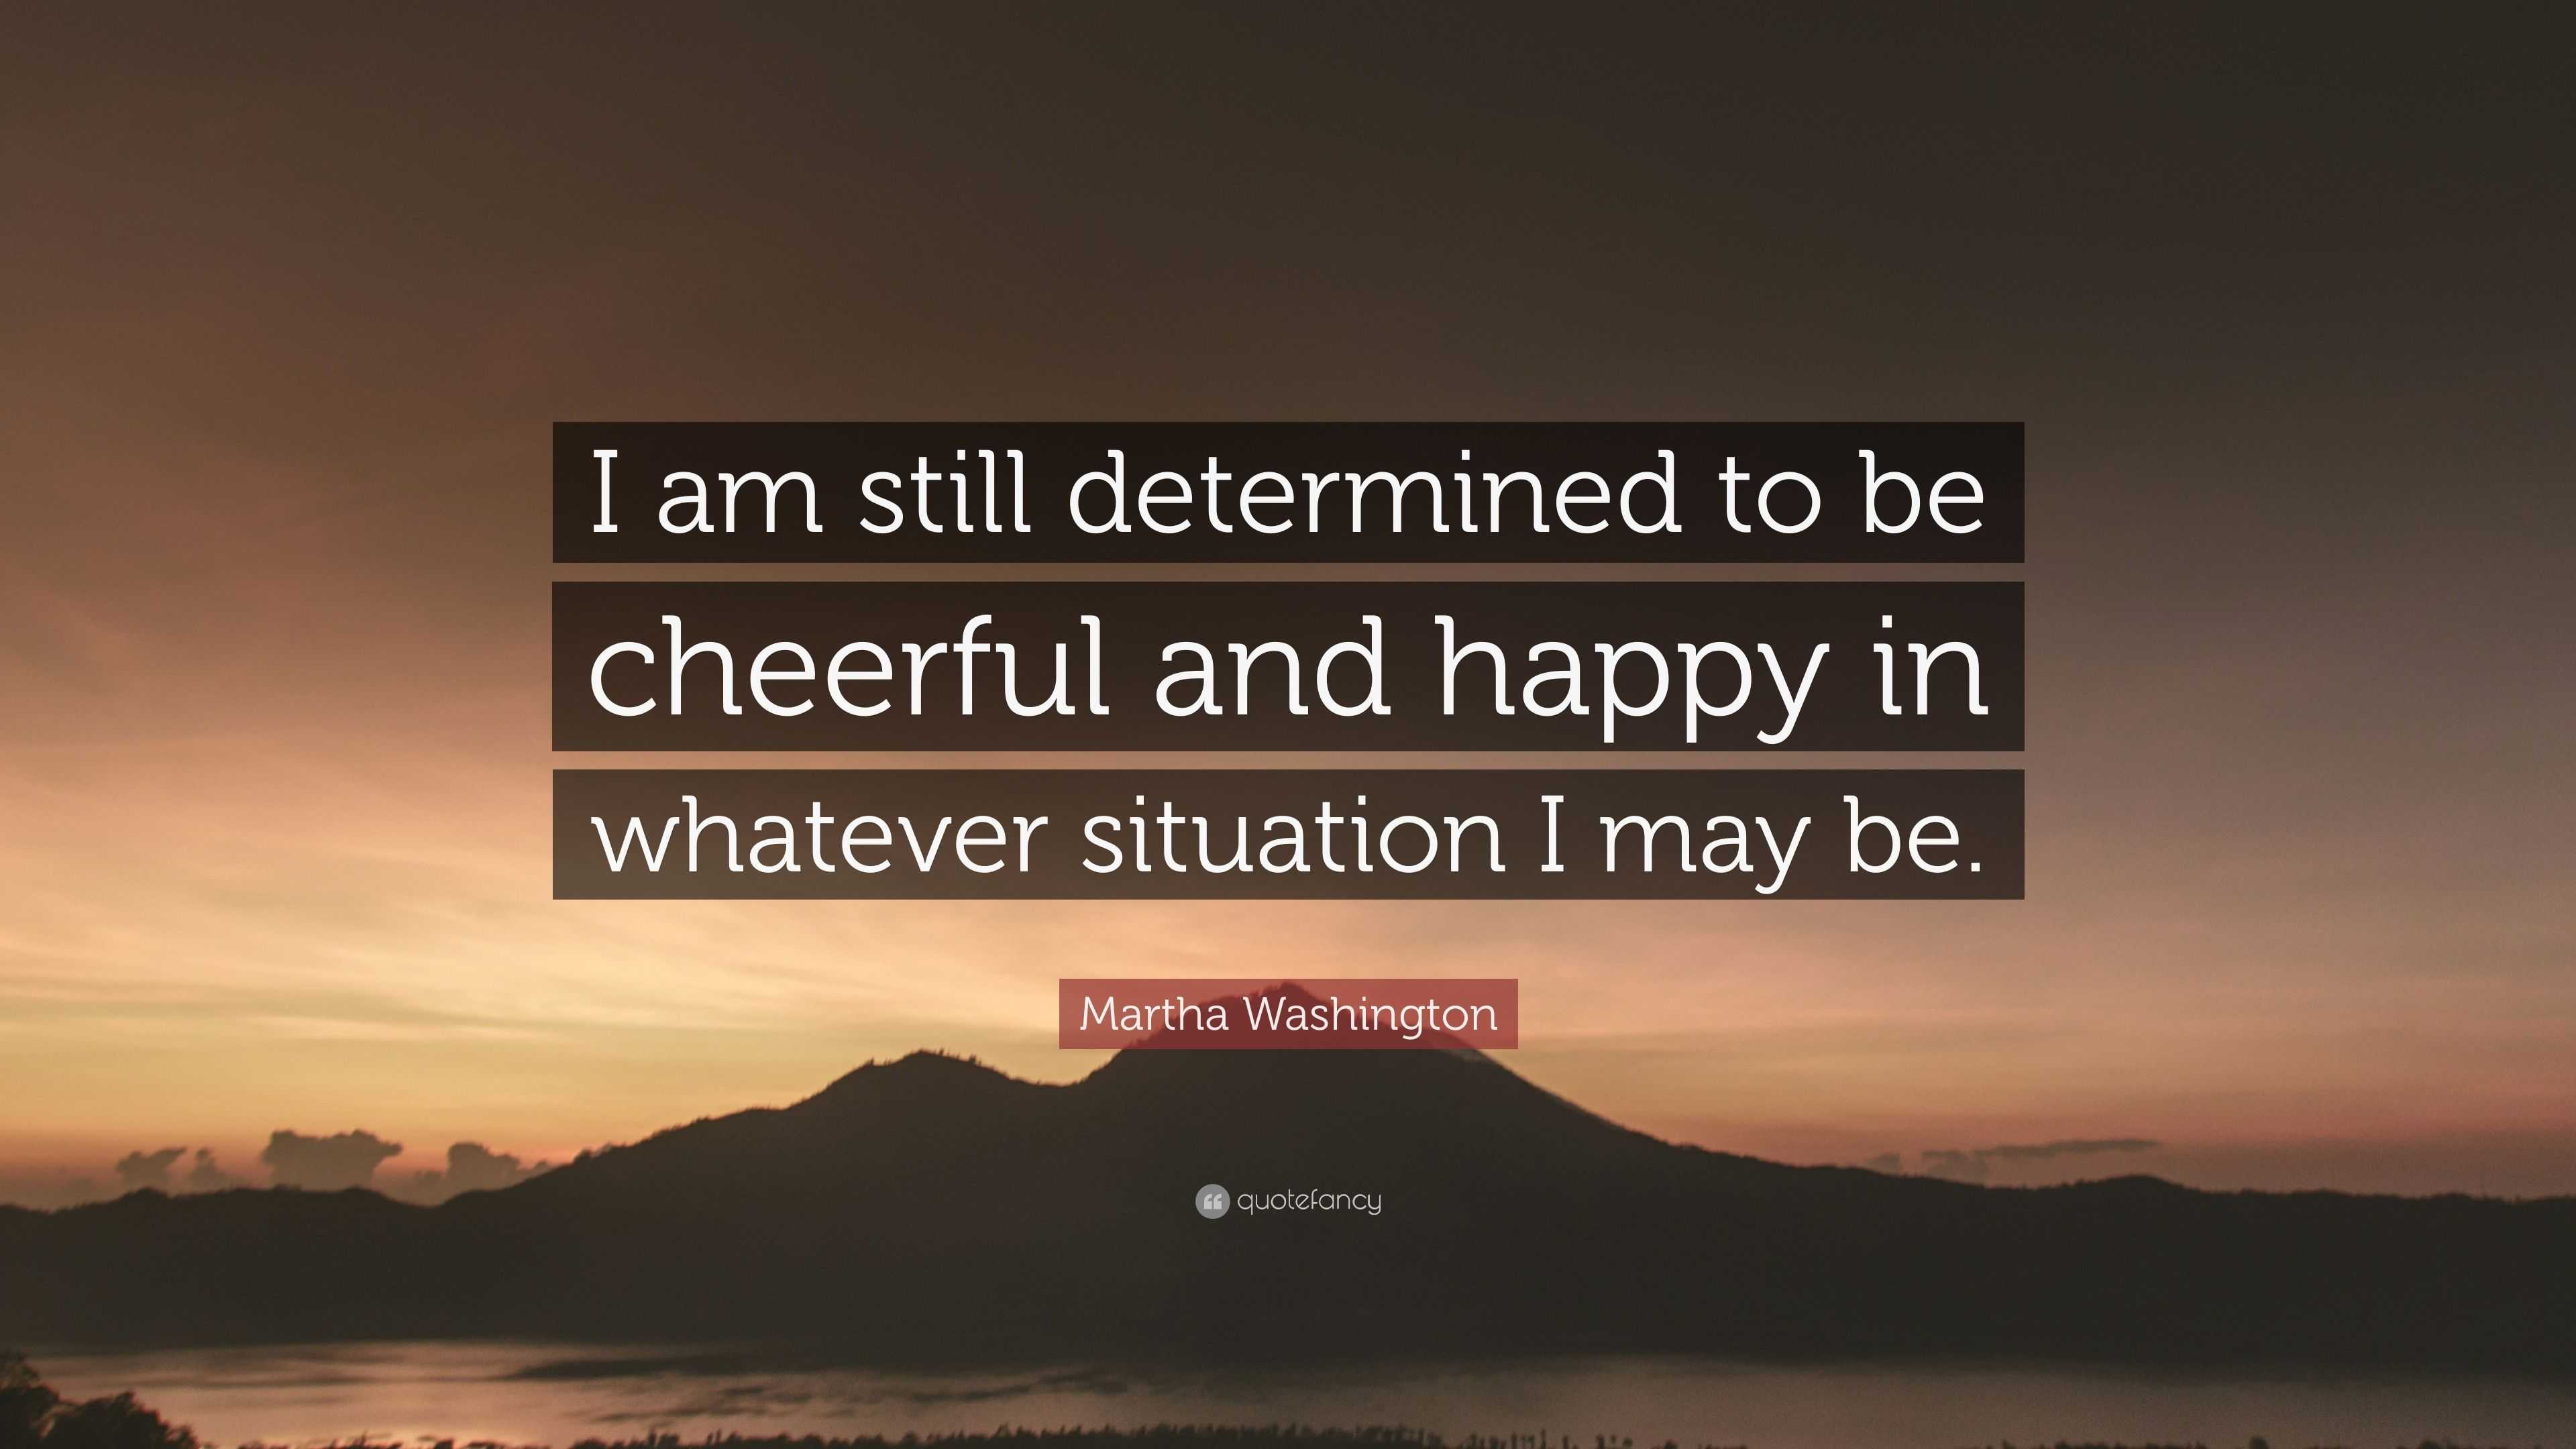 Martha Washington Quote: "I am still determined to be cheerful and happy in whatever situation I ...